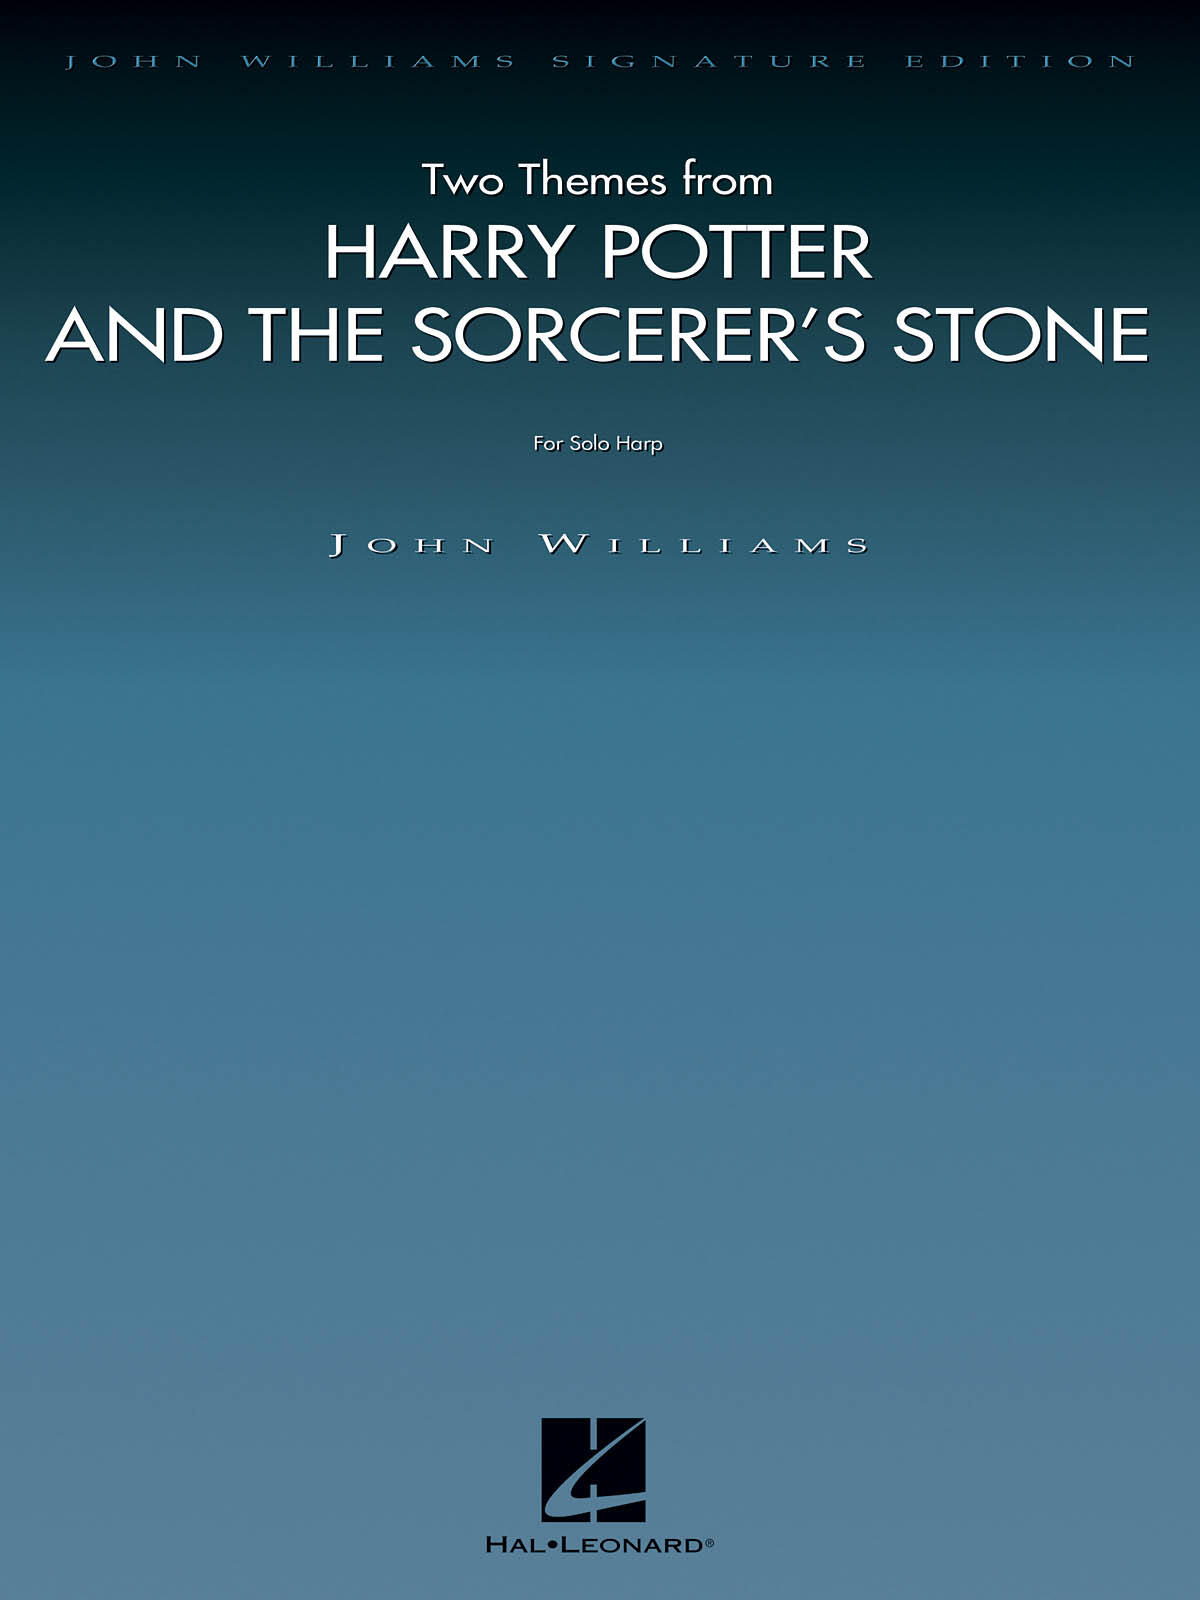 2 Themes from HARRY POTTER & THE SORCERER